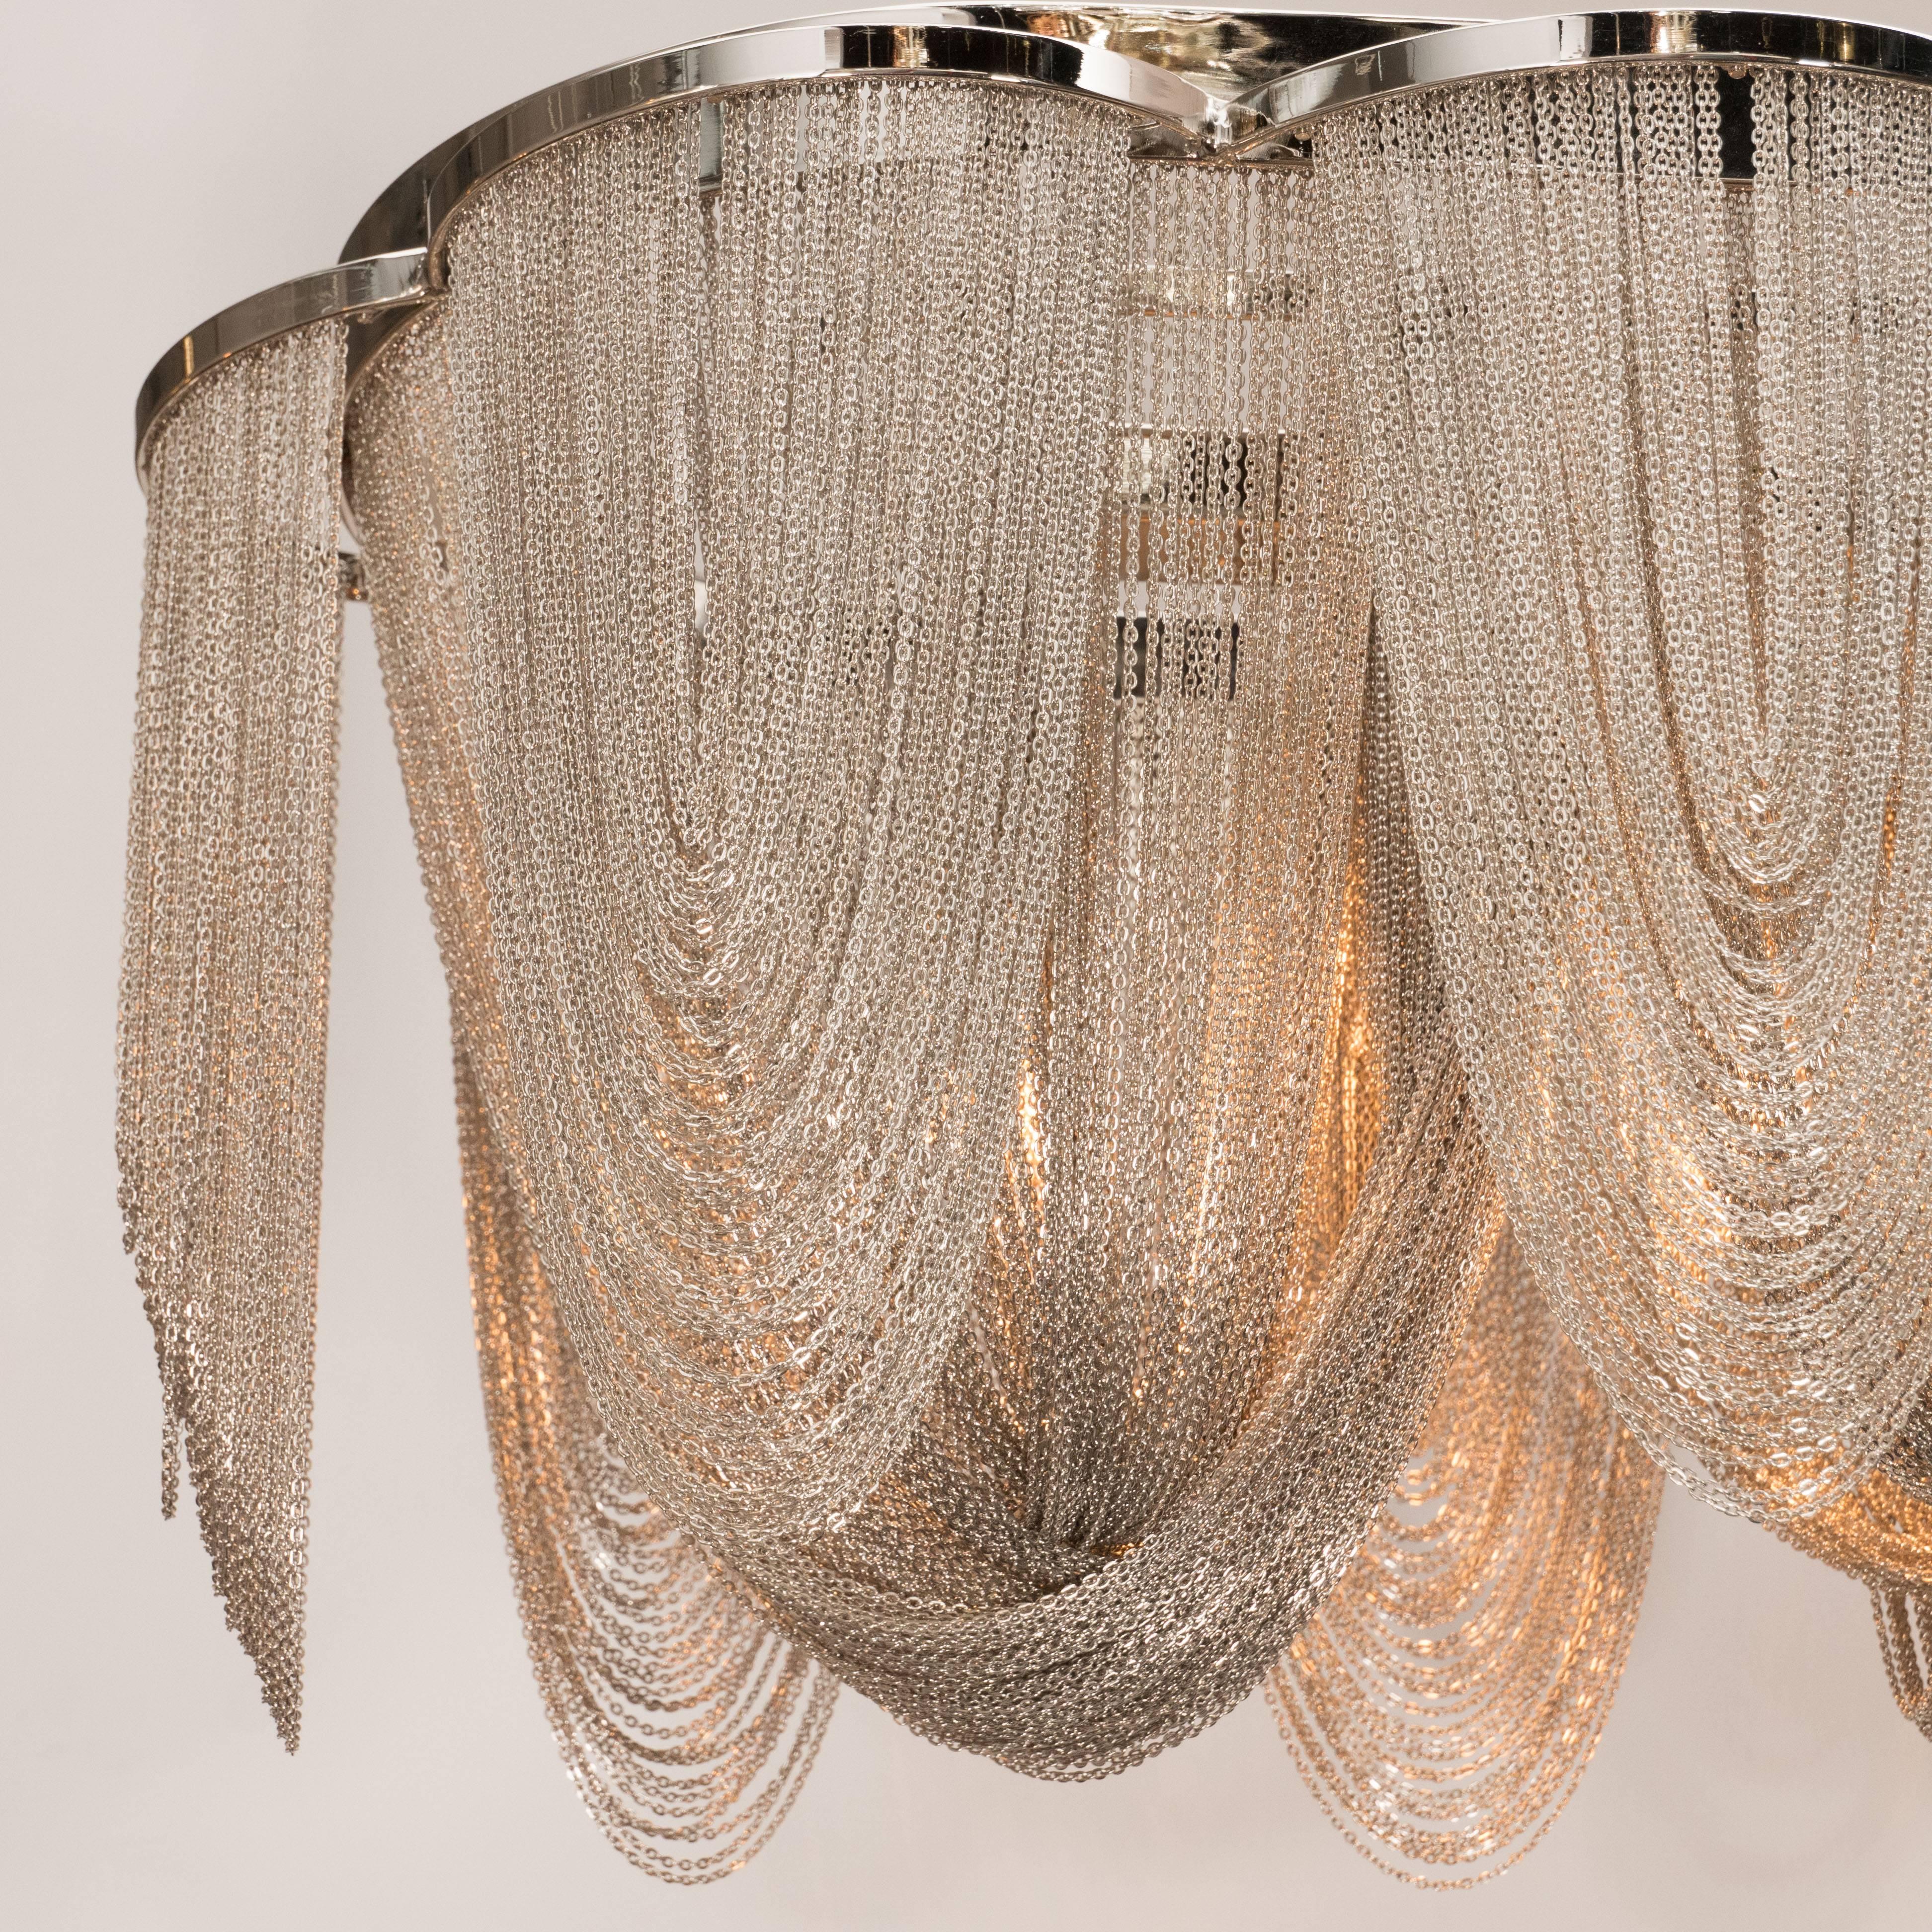 20th Century Modernist Polished Stainless Steel Draped Mesh Chandelier, Manner of Baylar